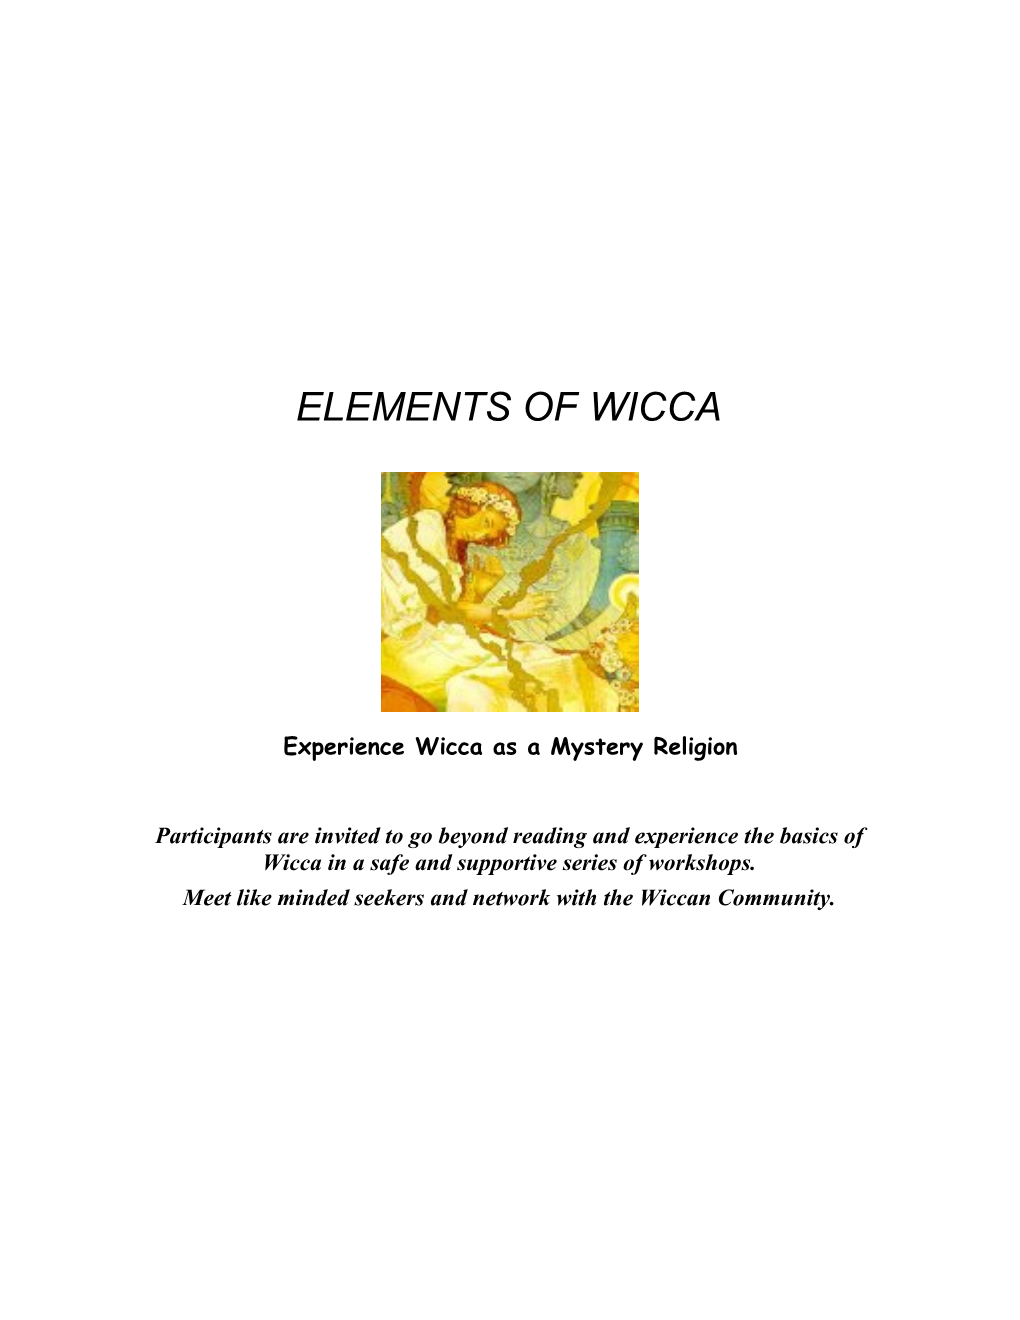 Experience Wicca As a Mystery Religion